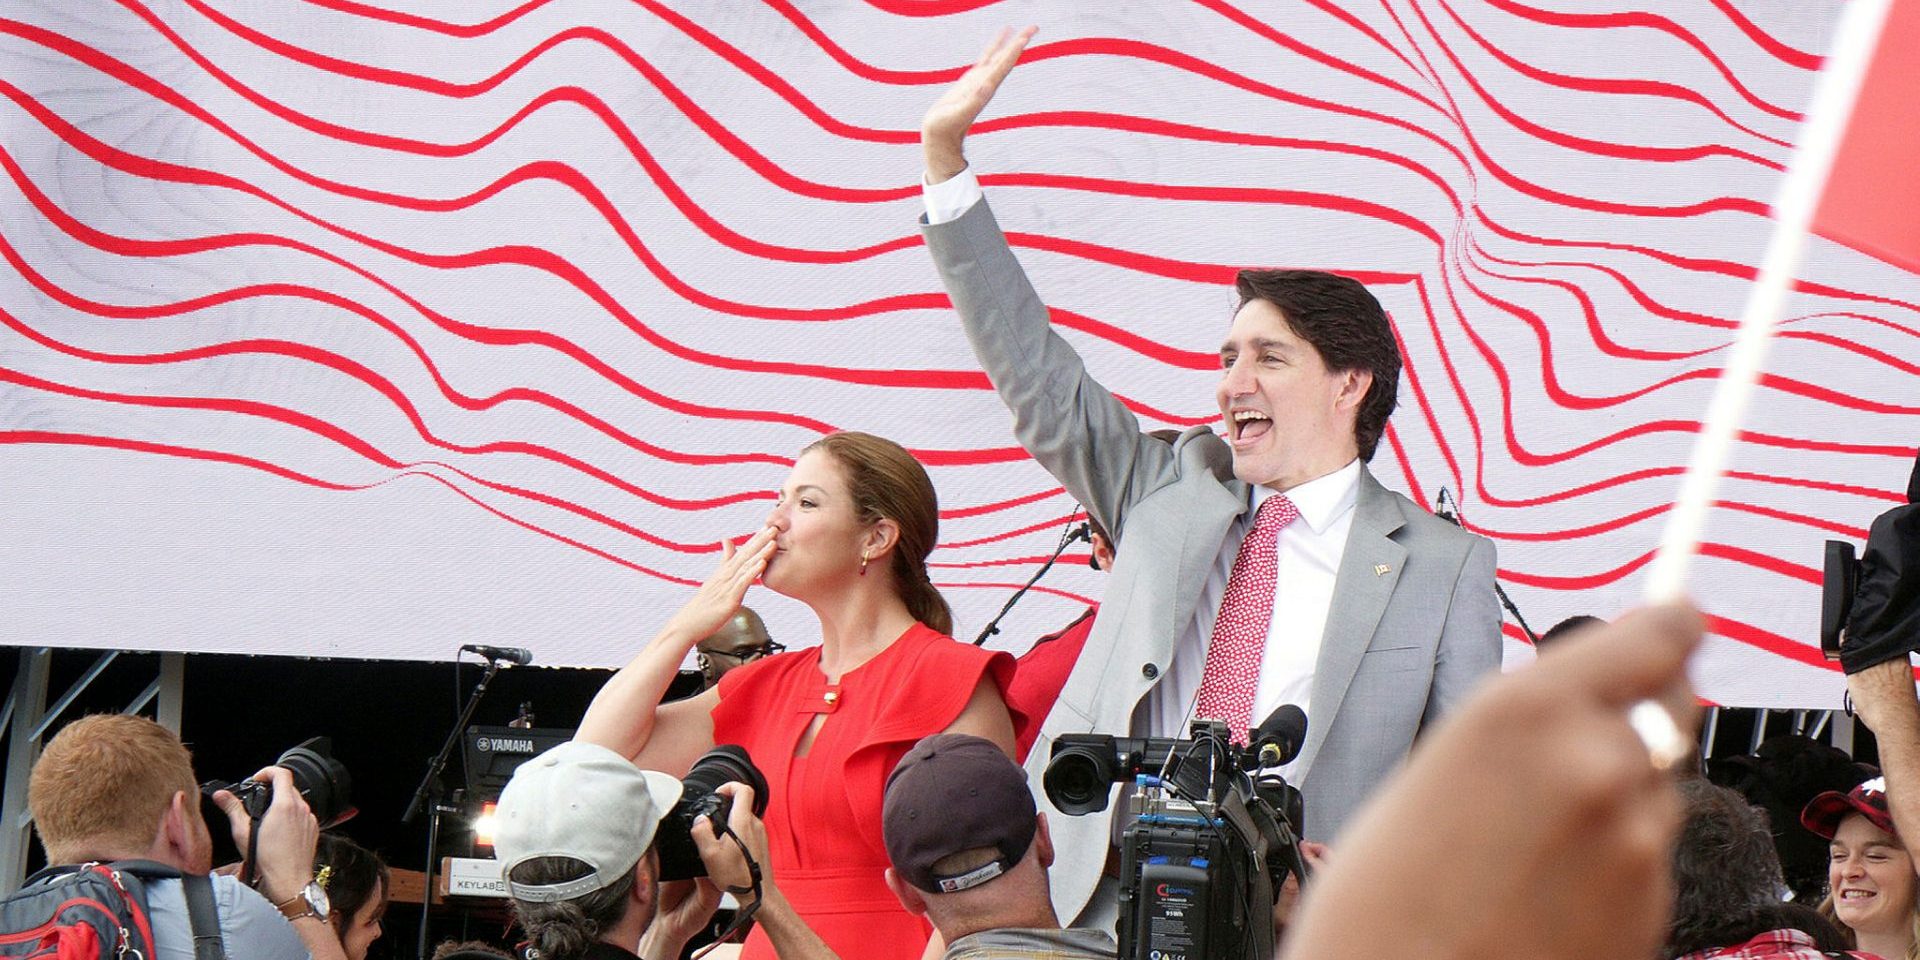 2022 Canada Day celebration July 1st. at LeBreton Flats and Parliament Hill.   Sophie Grégoire and Justin Trudeau departing the stage.  The Hill Times photograph by Sam Garcia.